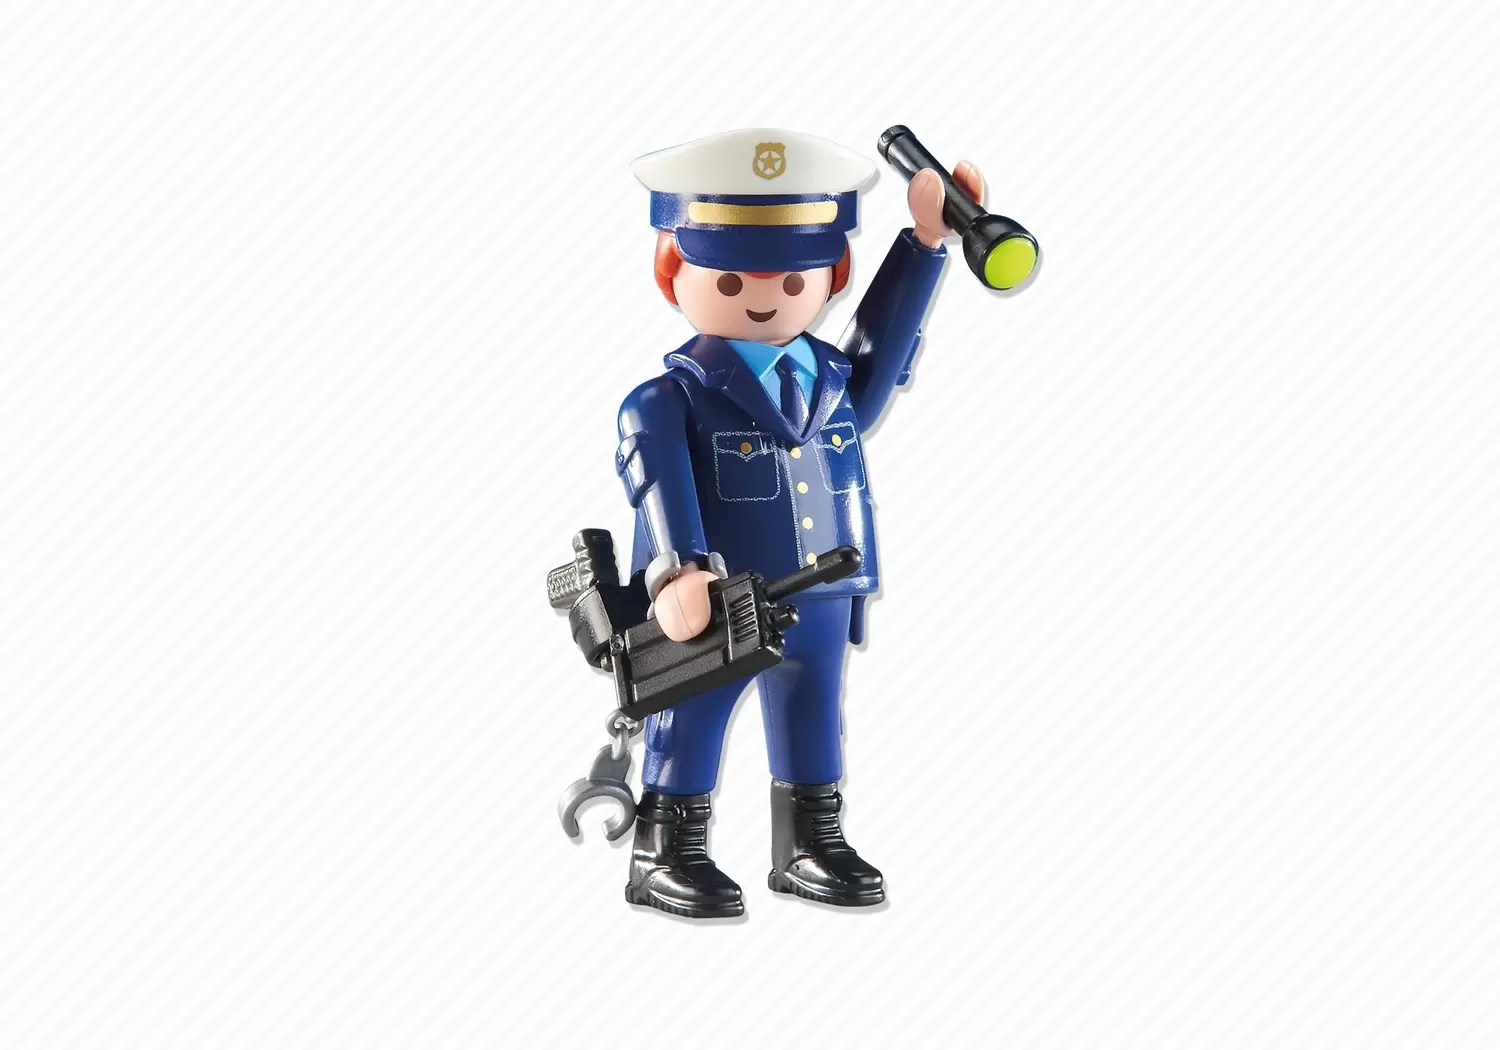 PLAYMOBIL FIGURE POLICE OFFICER POLICE OFFICERS TRAFFIC COMMISSION  STATION